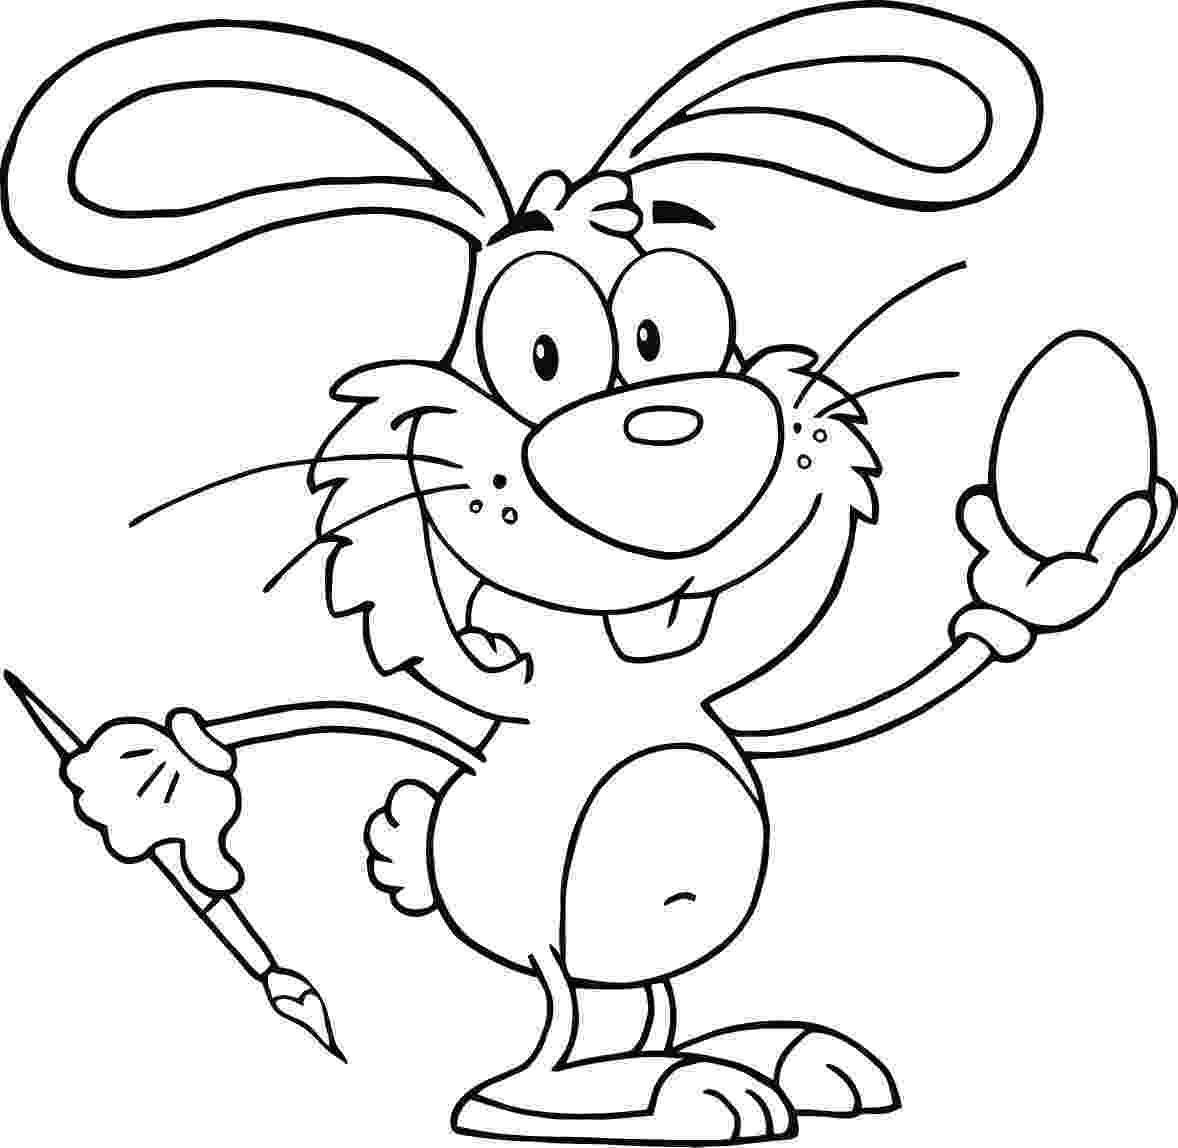 rabbit coloring pictures bunny coloring pages best coloring pages for kids pictures coloring rabbit 